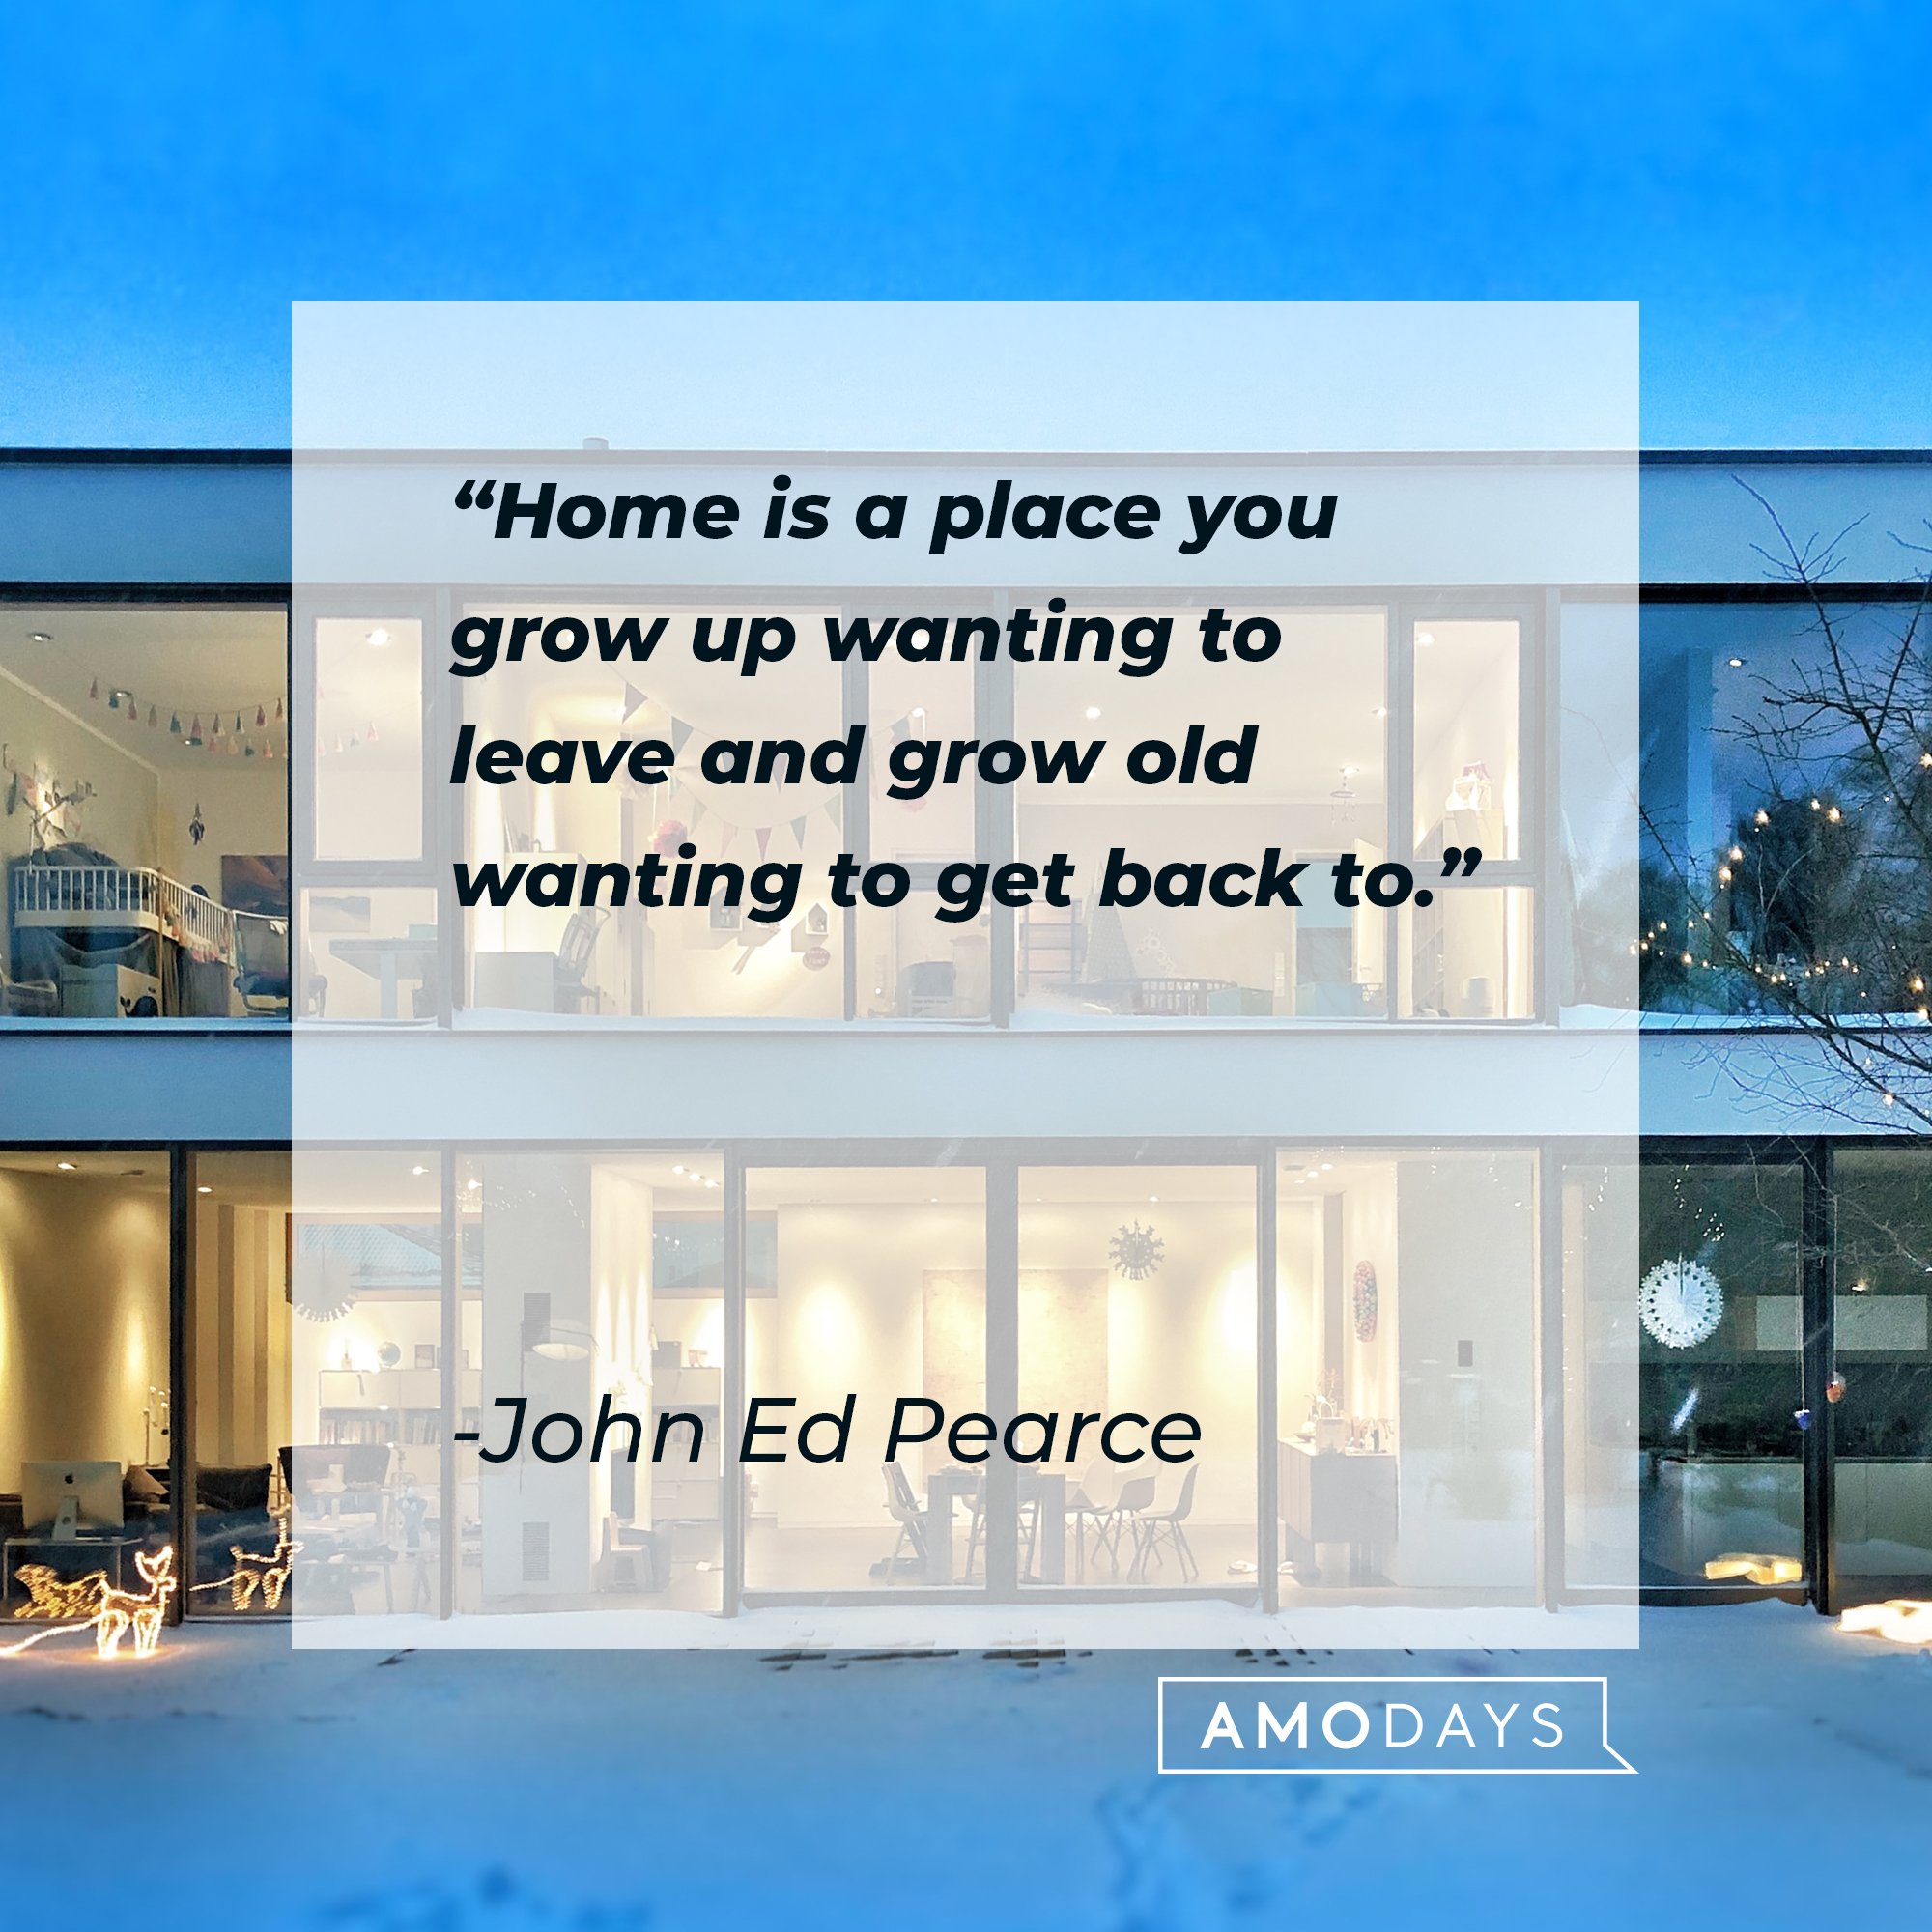 John Ed Pearce's quote: "Home is a place you grow up wanting to leave and grow old wanting to get back to." | Image: AmoDays